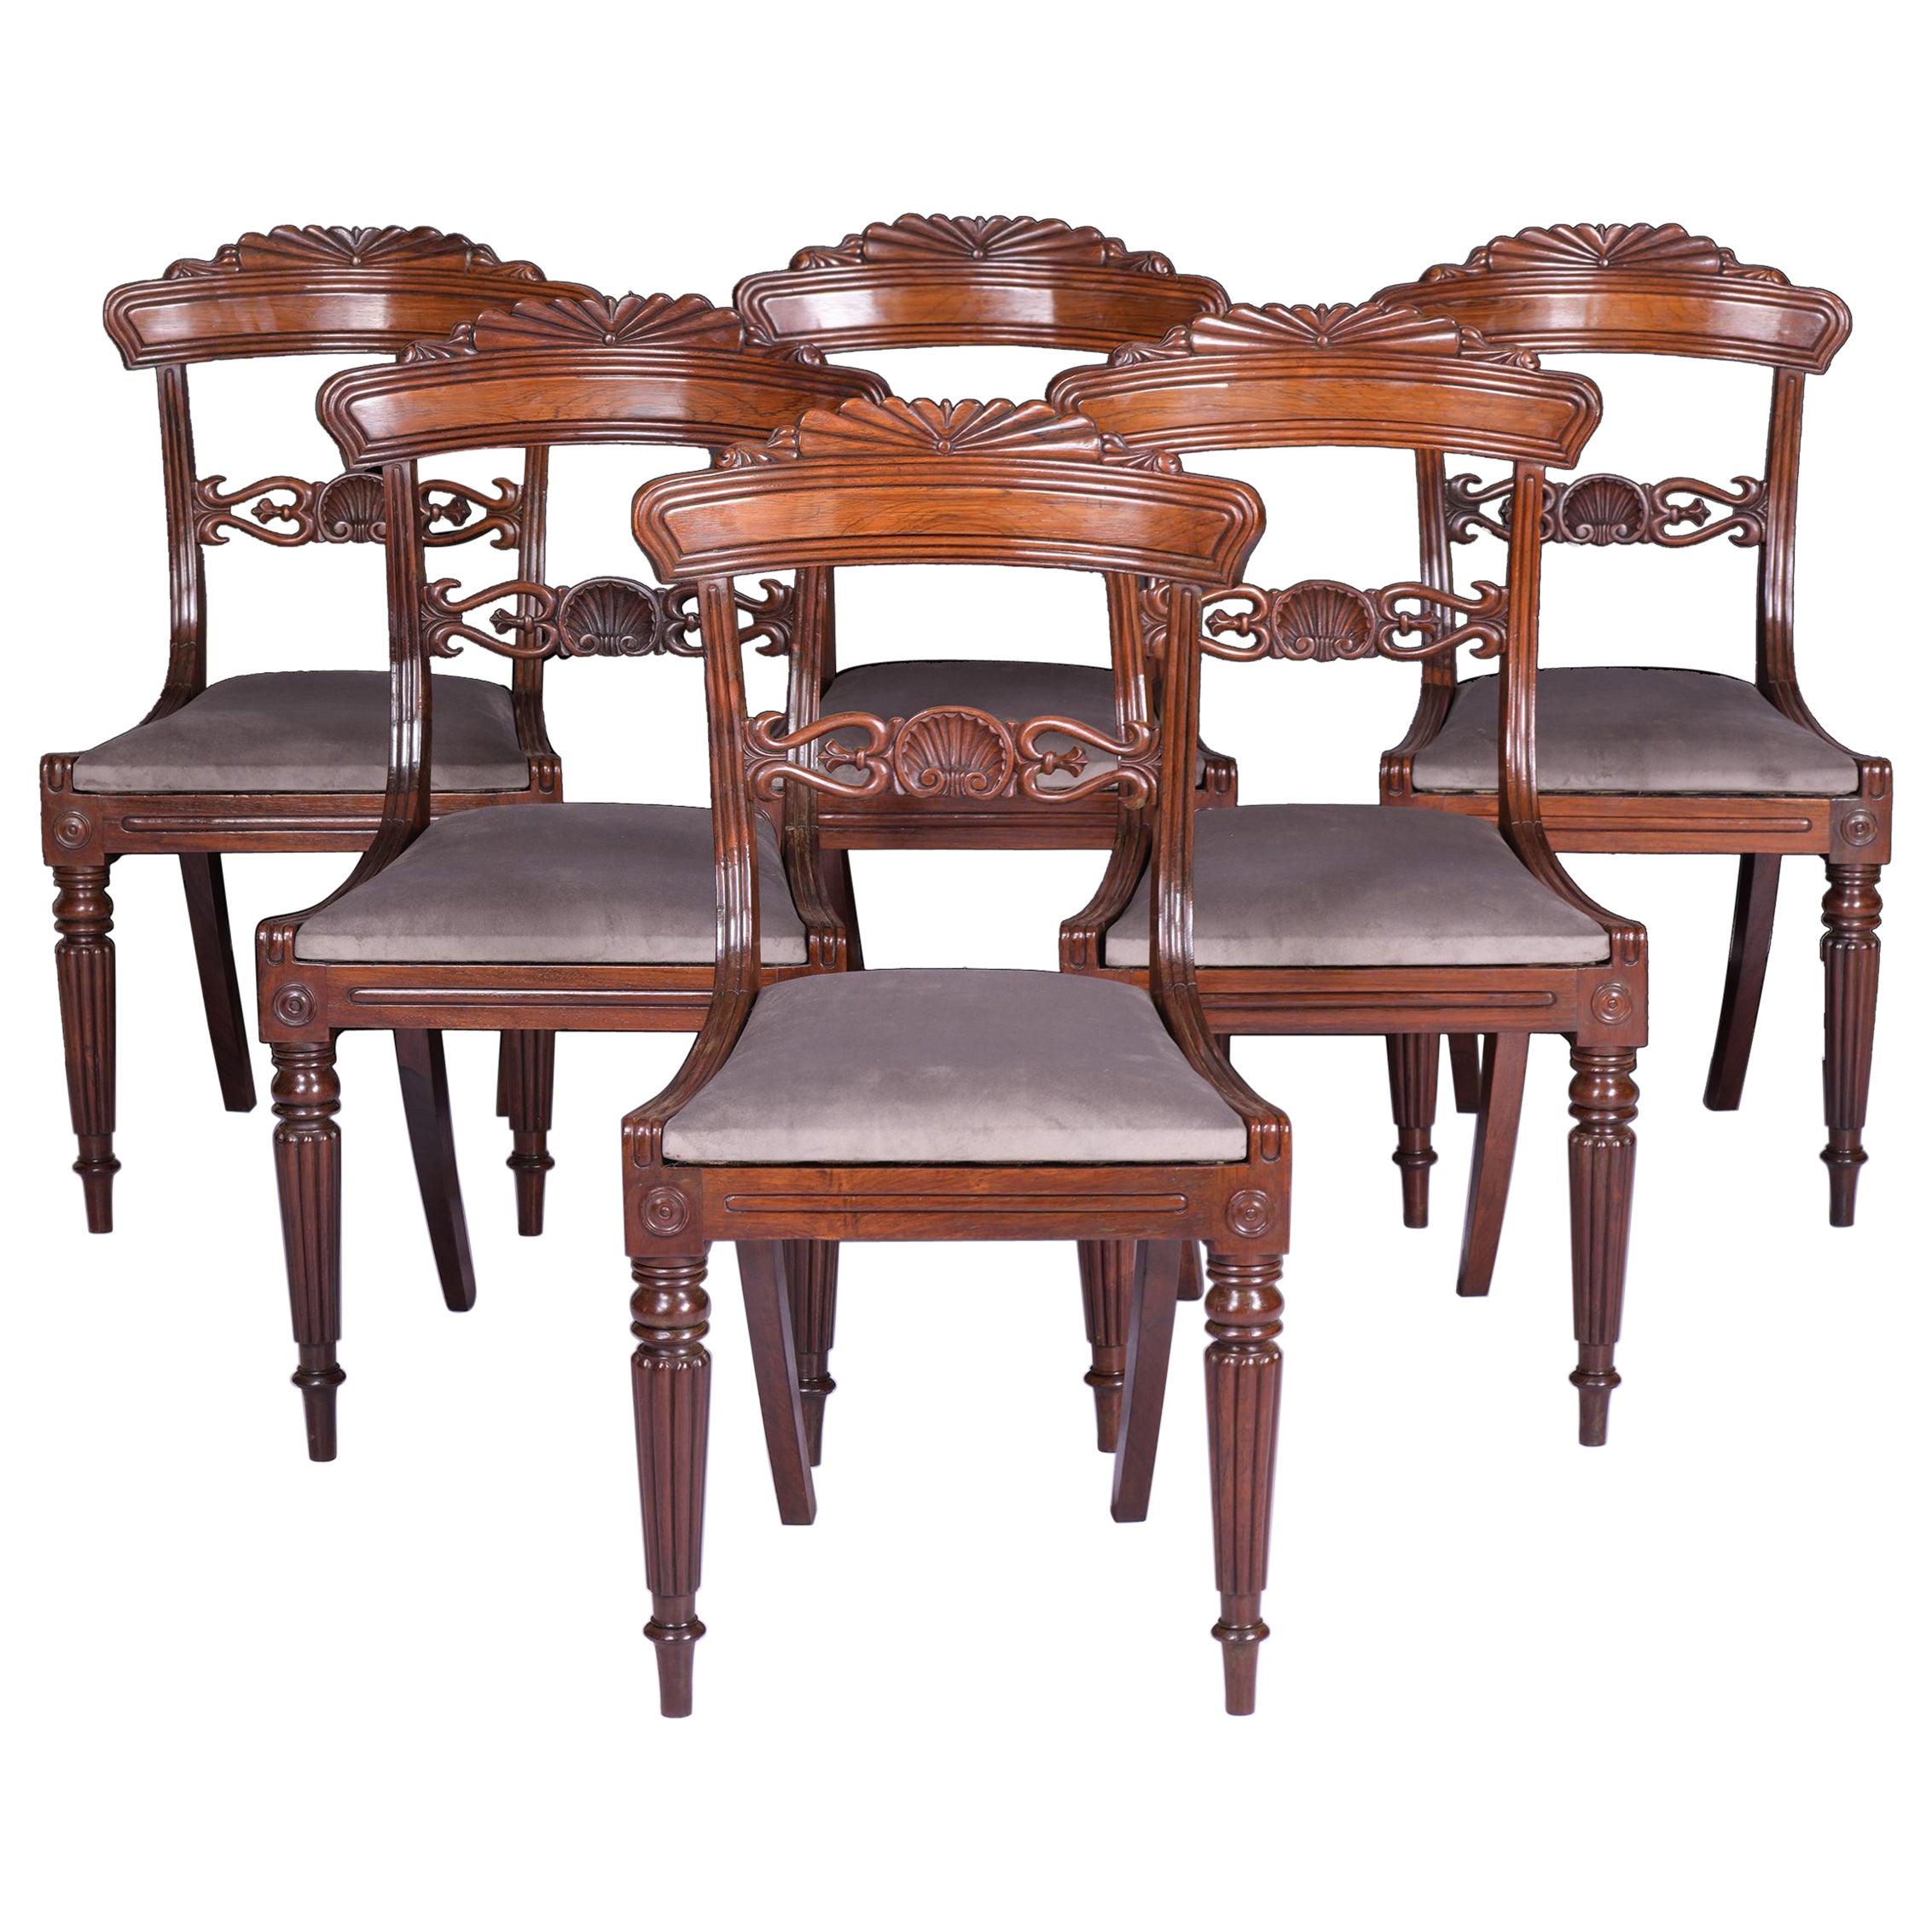 Set Of 6 Early 19th Century English Regency Chairs Attributed To Gillows 